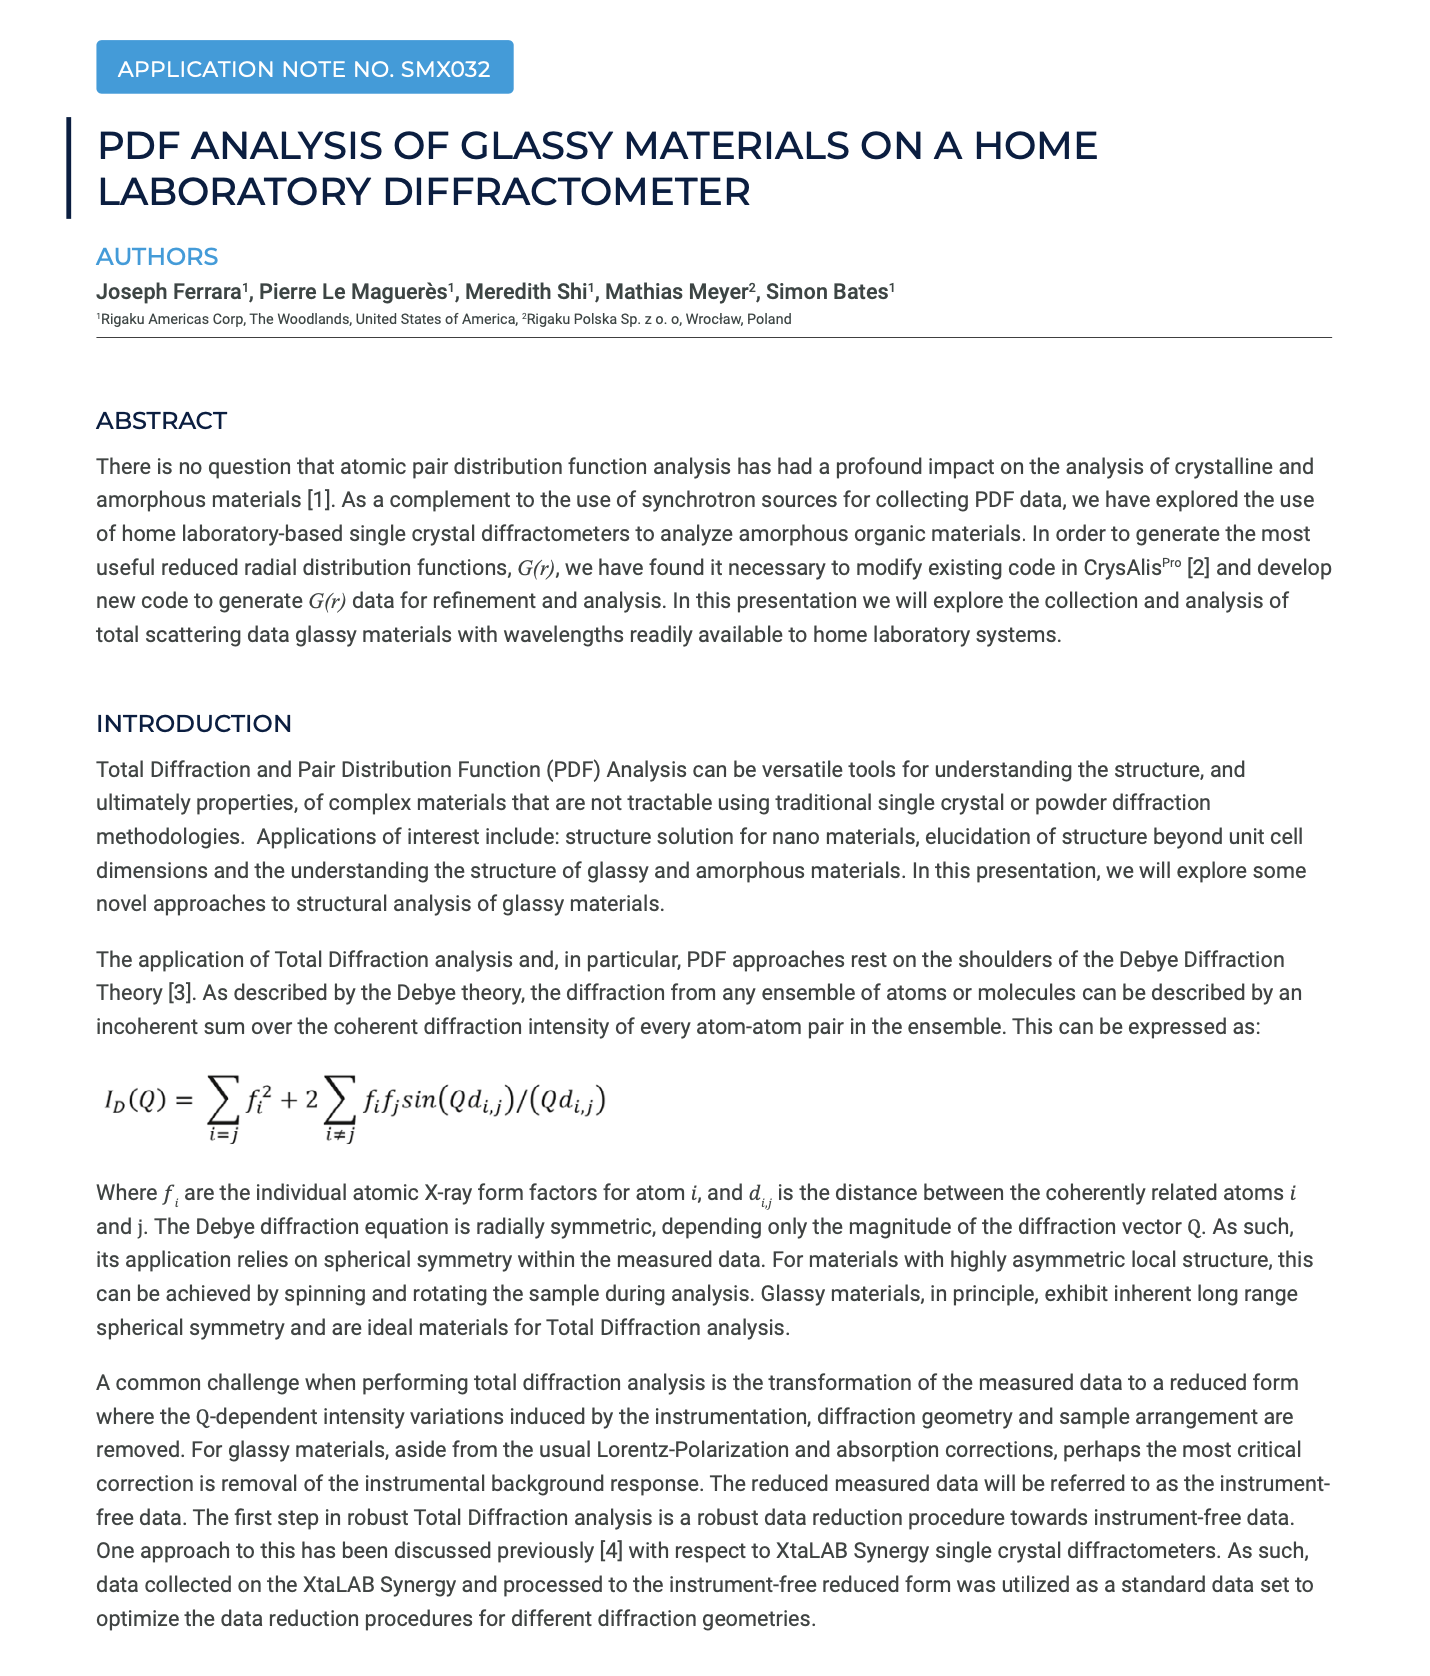 PDF Analysis of Glassy Materials on a Home Laboratory Diffractometer